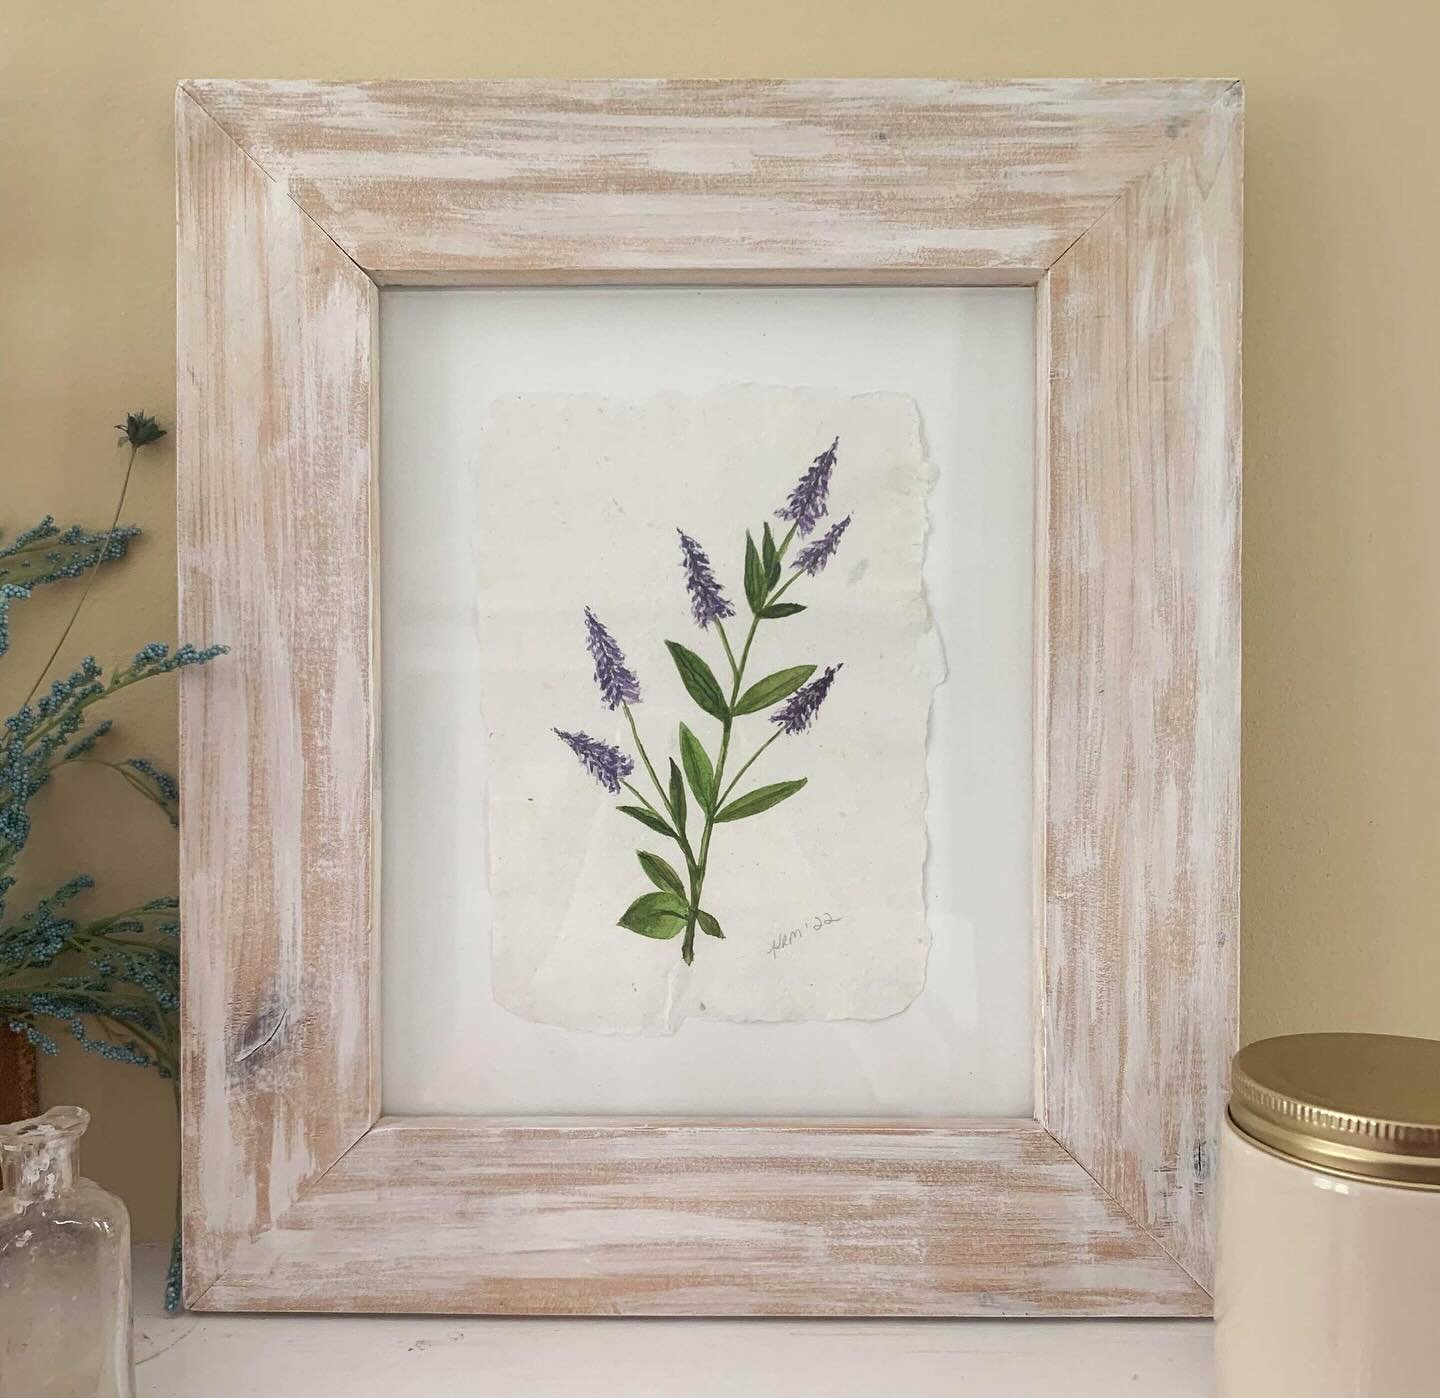 Purple wild flowers painted in watercolors on handmade paper. Mounted in wood white-washed frame.
#wildflowers #wildflowerpainting #purpleflowers #flowerpainting #inspiredbyflowers #botanicalart #watercolorpainting #framedart #artforyourhome #handmad